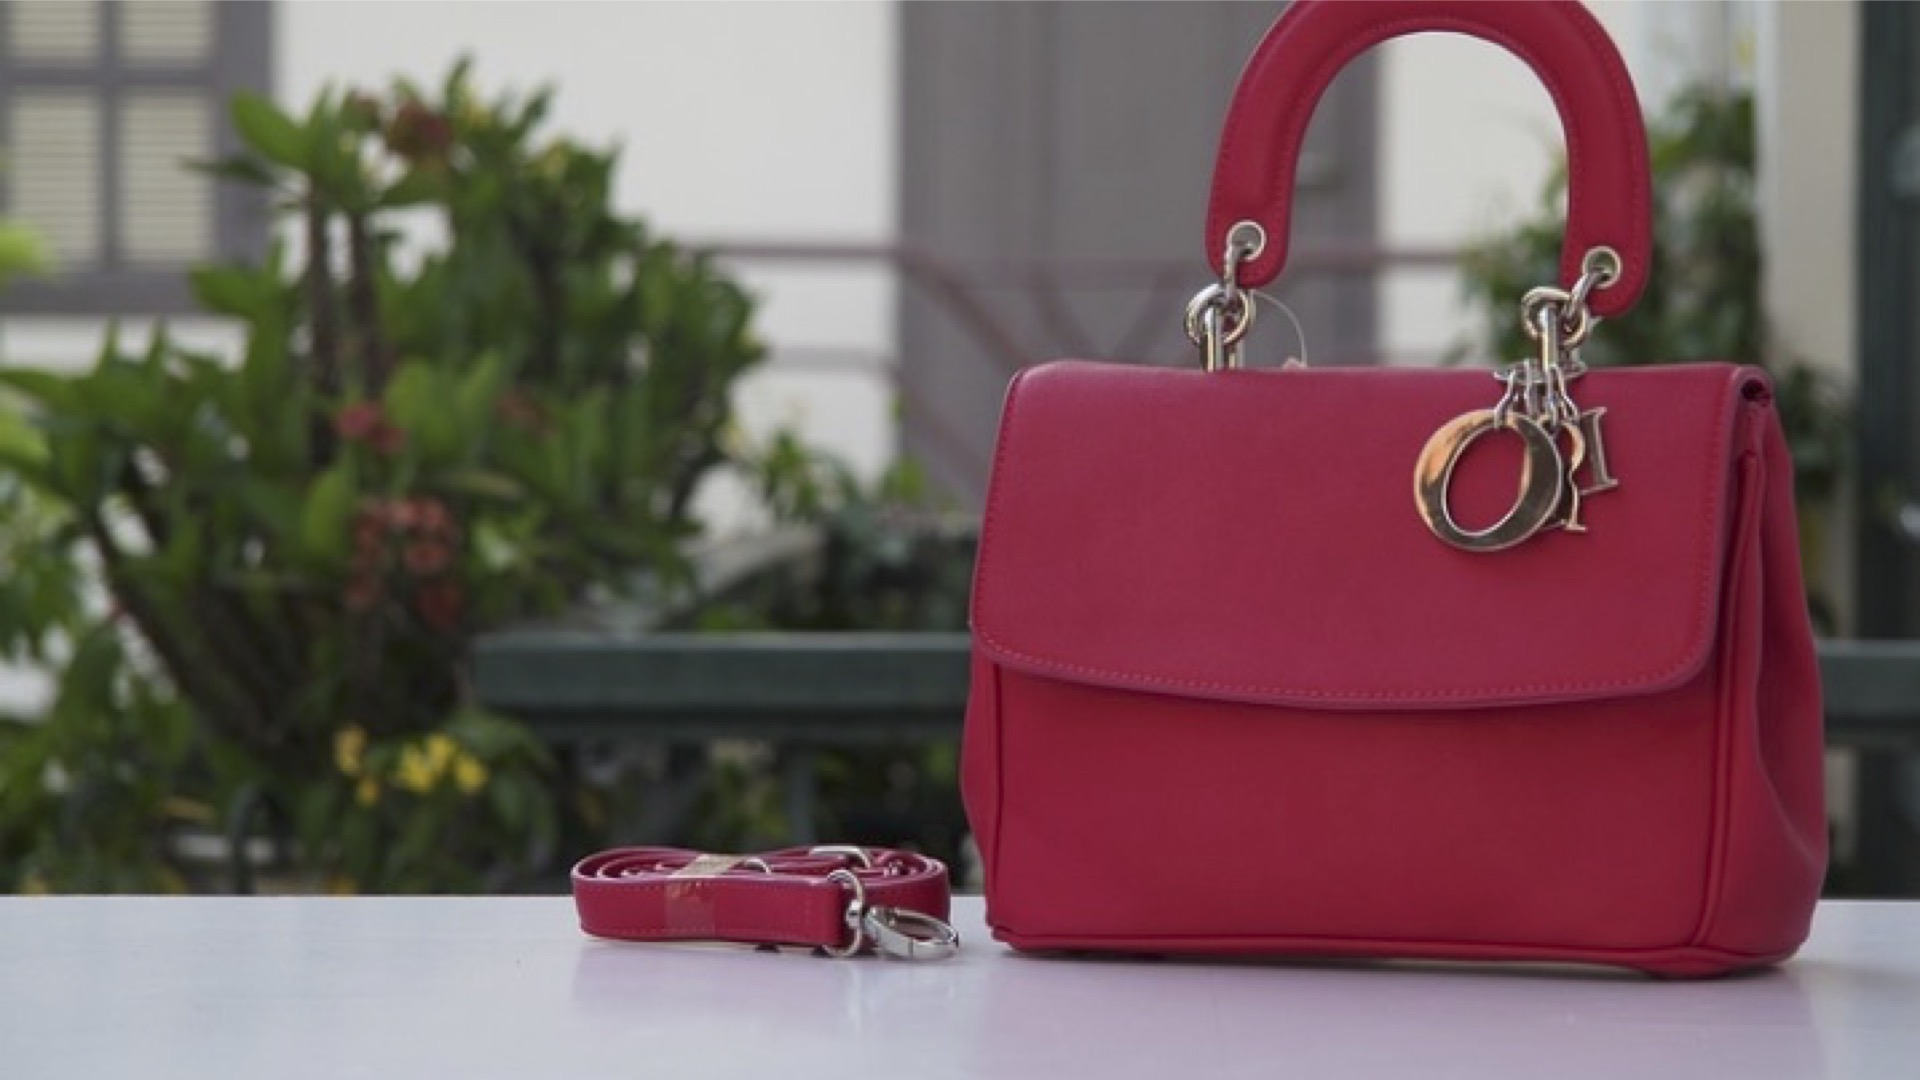 4 Reasons Why You Should Get a Dior Bag